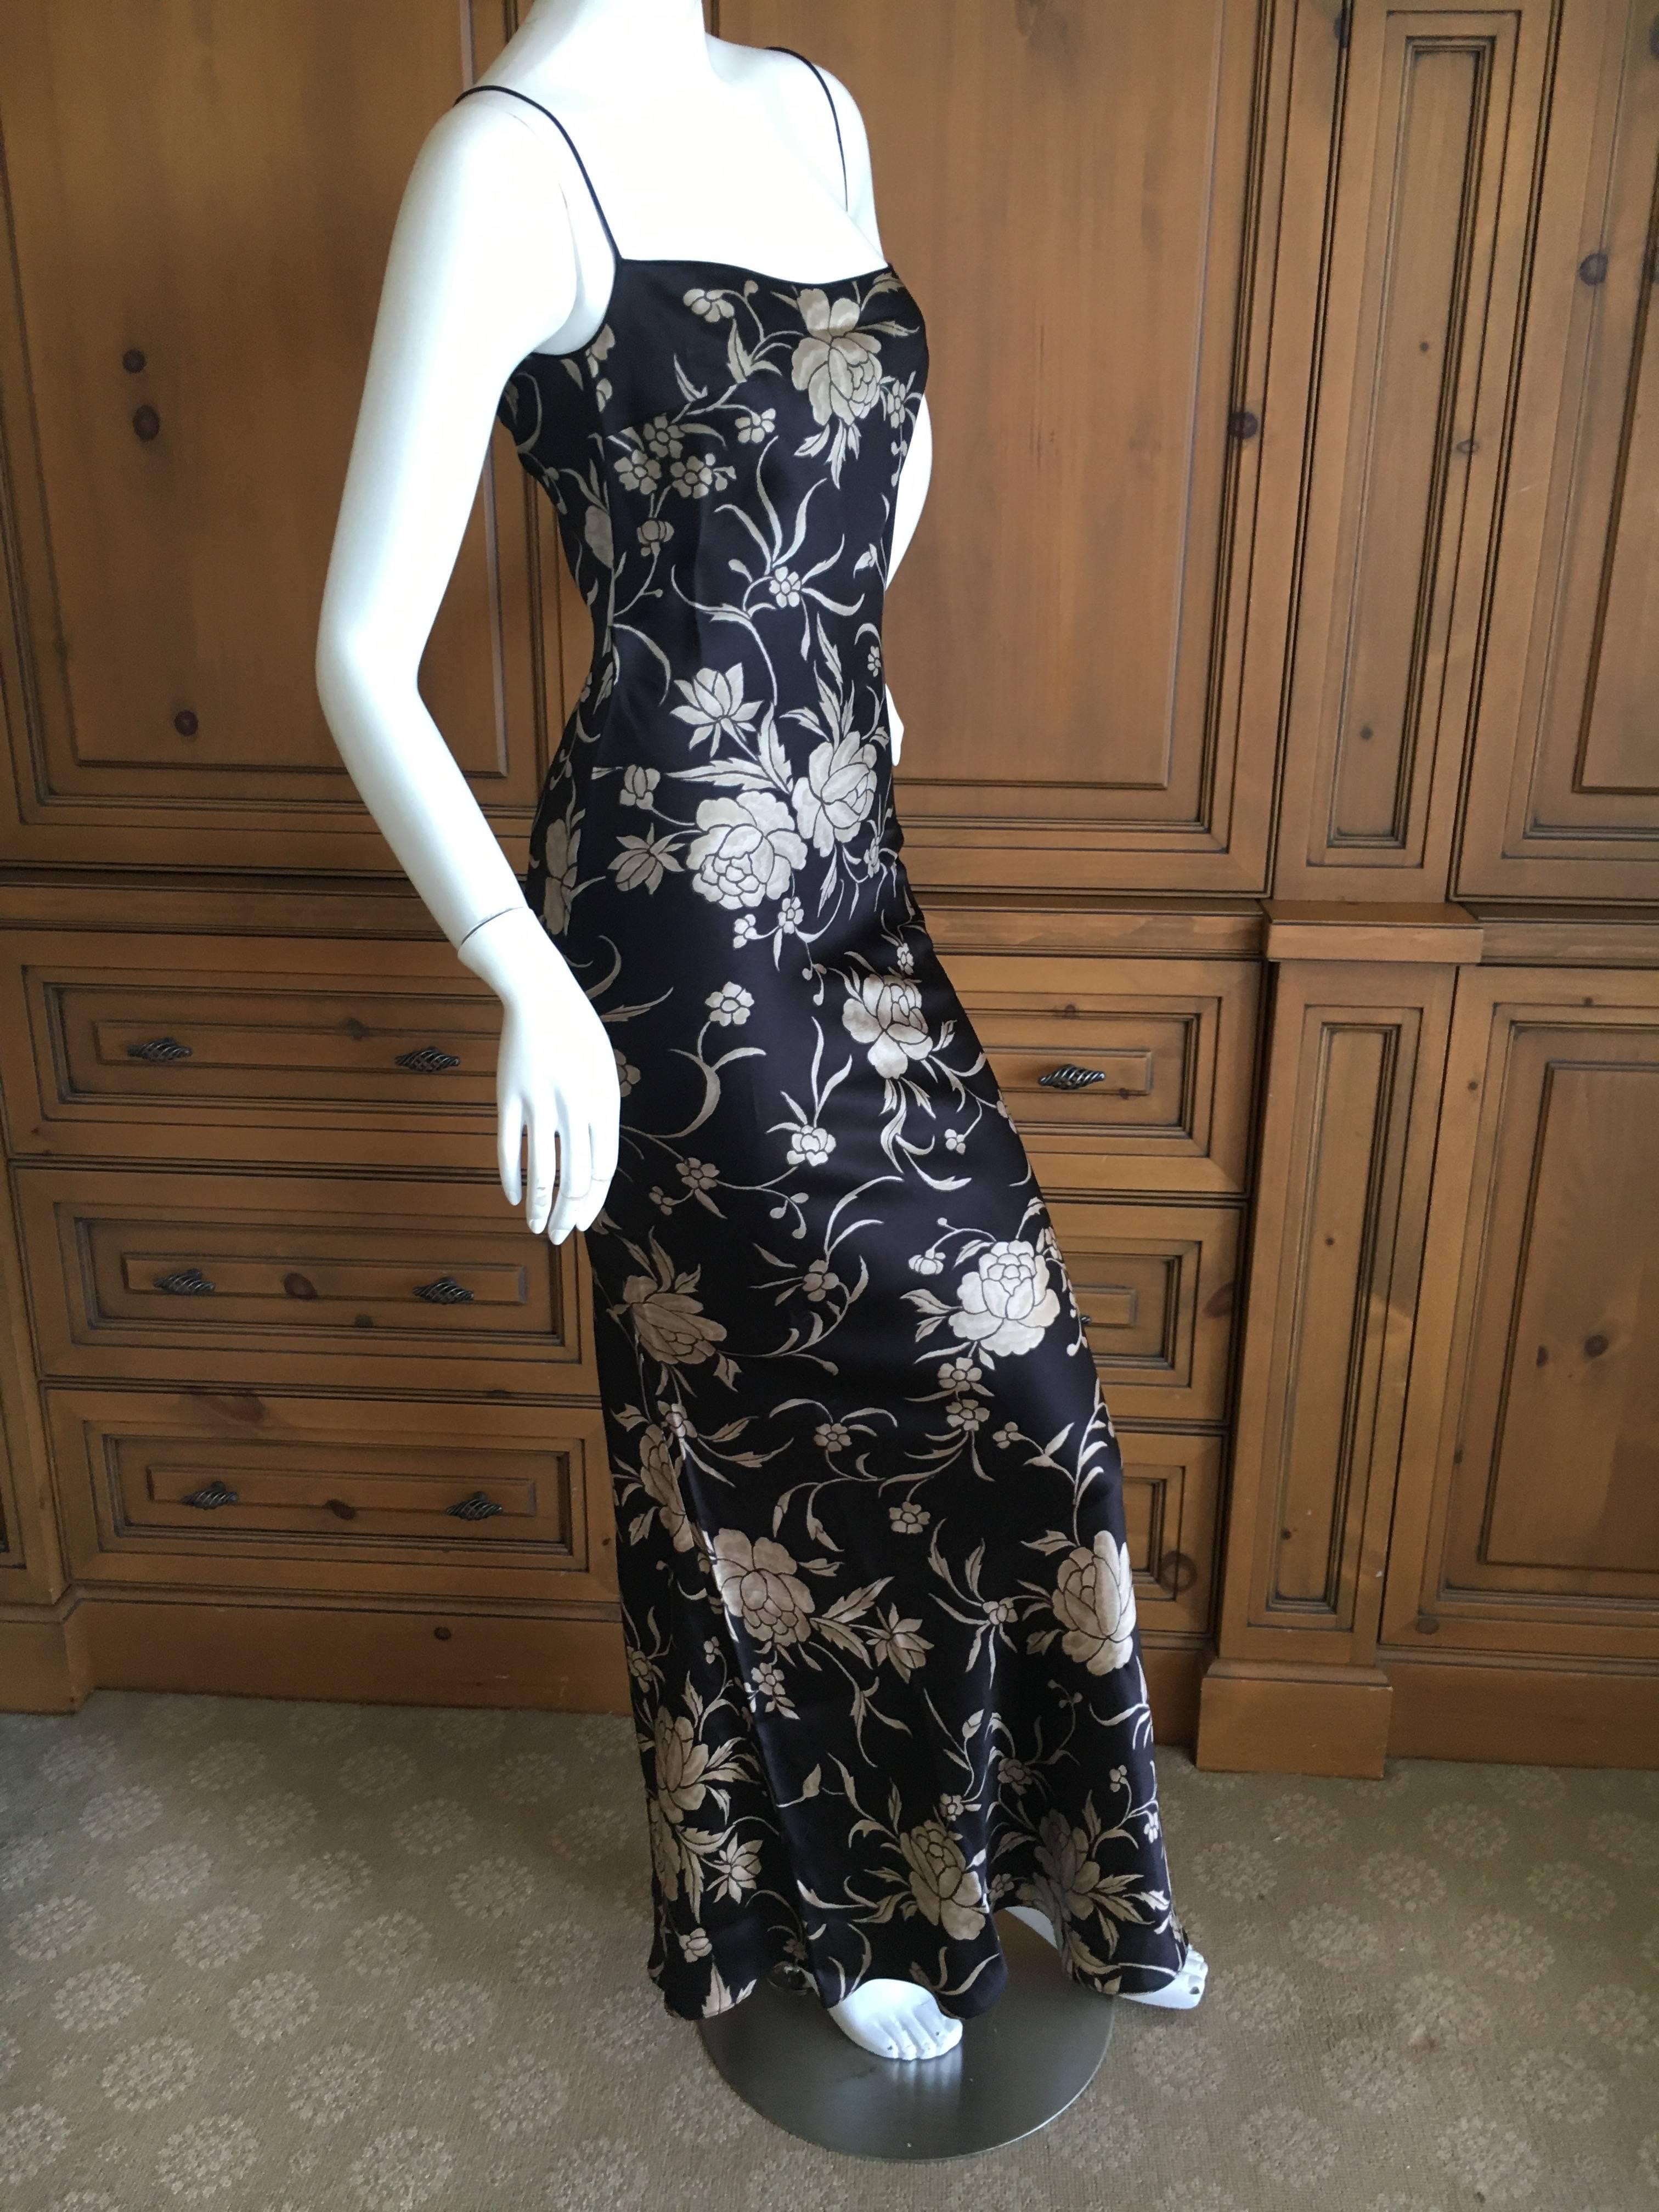 John Galliano Early 1990's Label Bias Cut Floral Dress In Excellent Condition For Sale In Cloverdale, CA